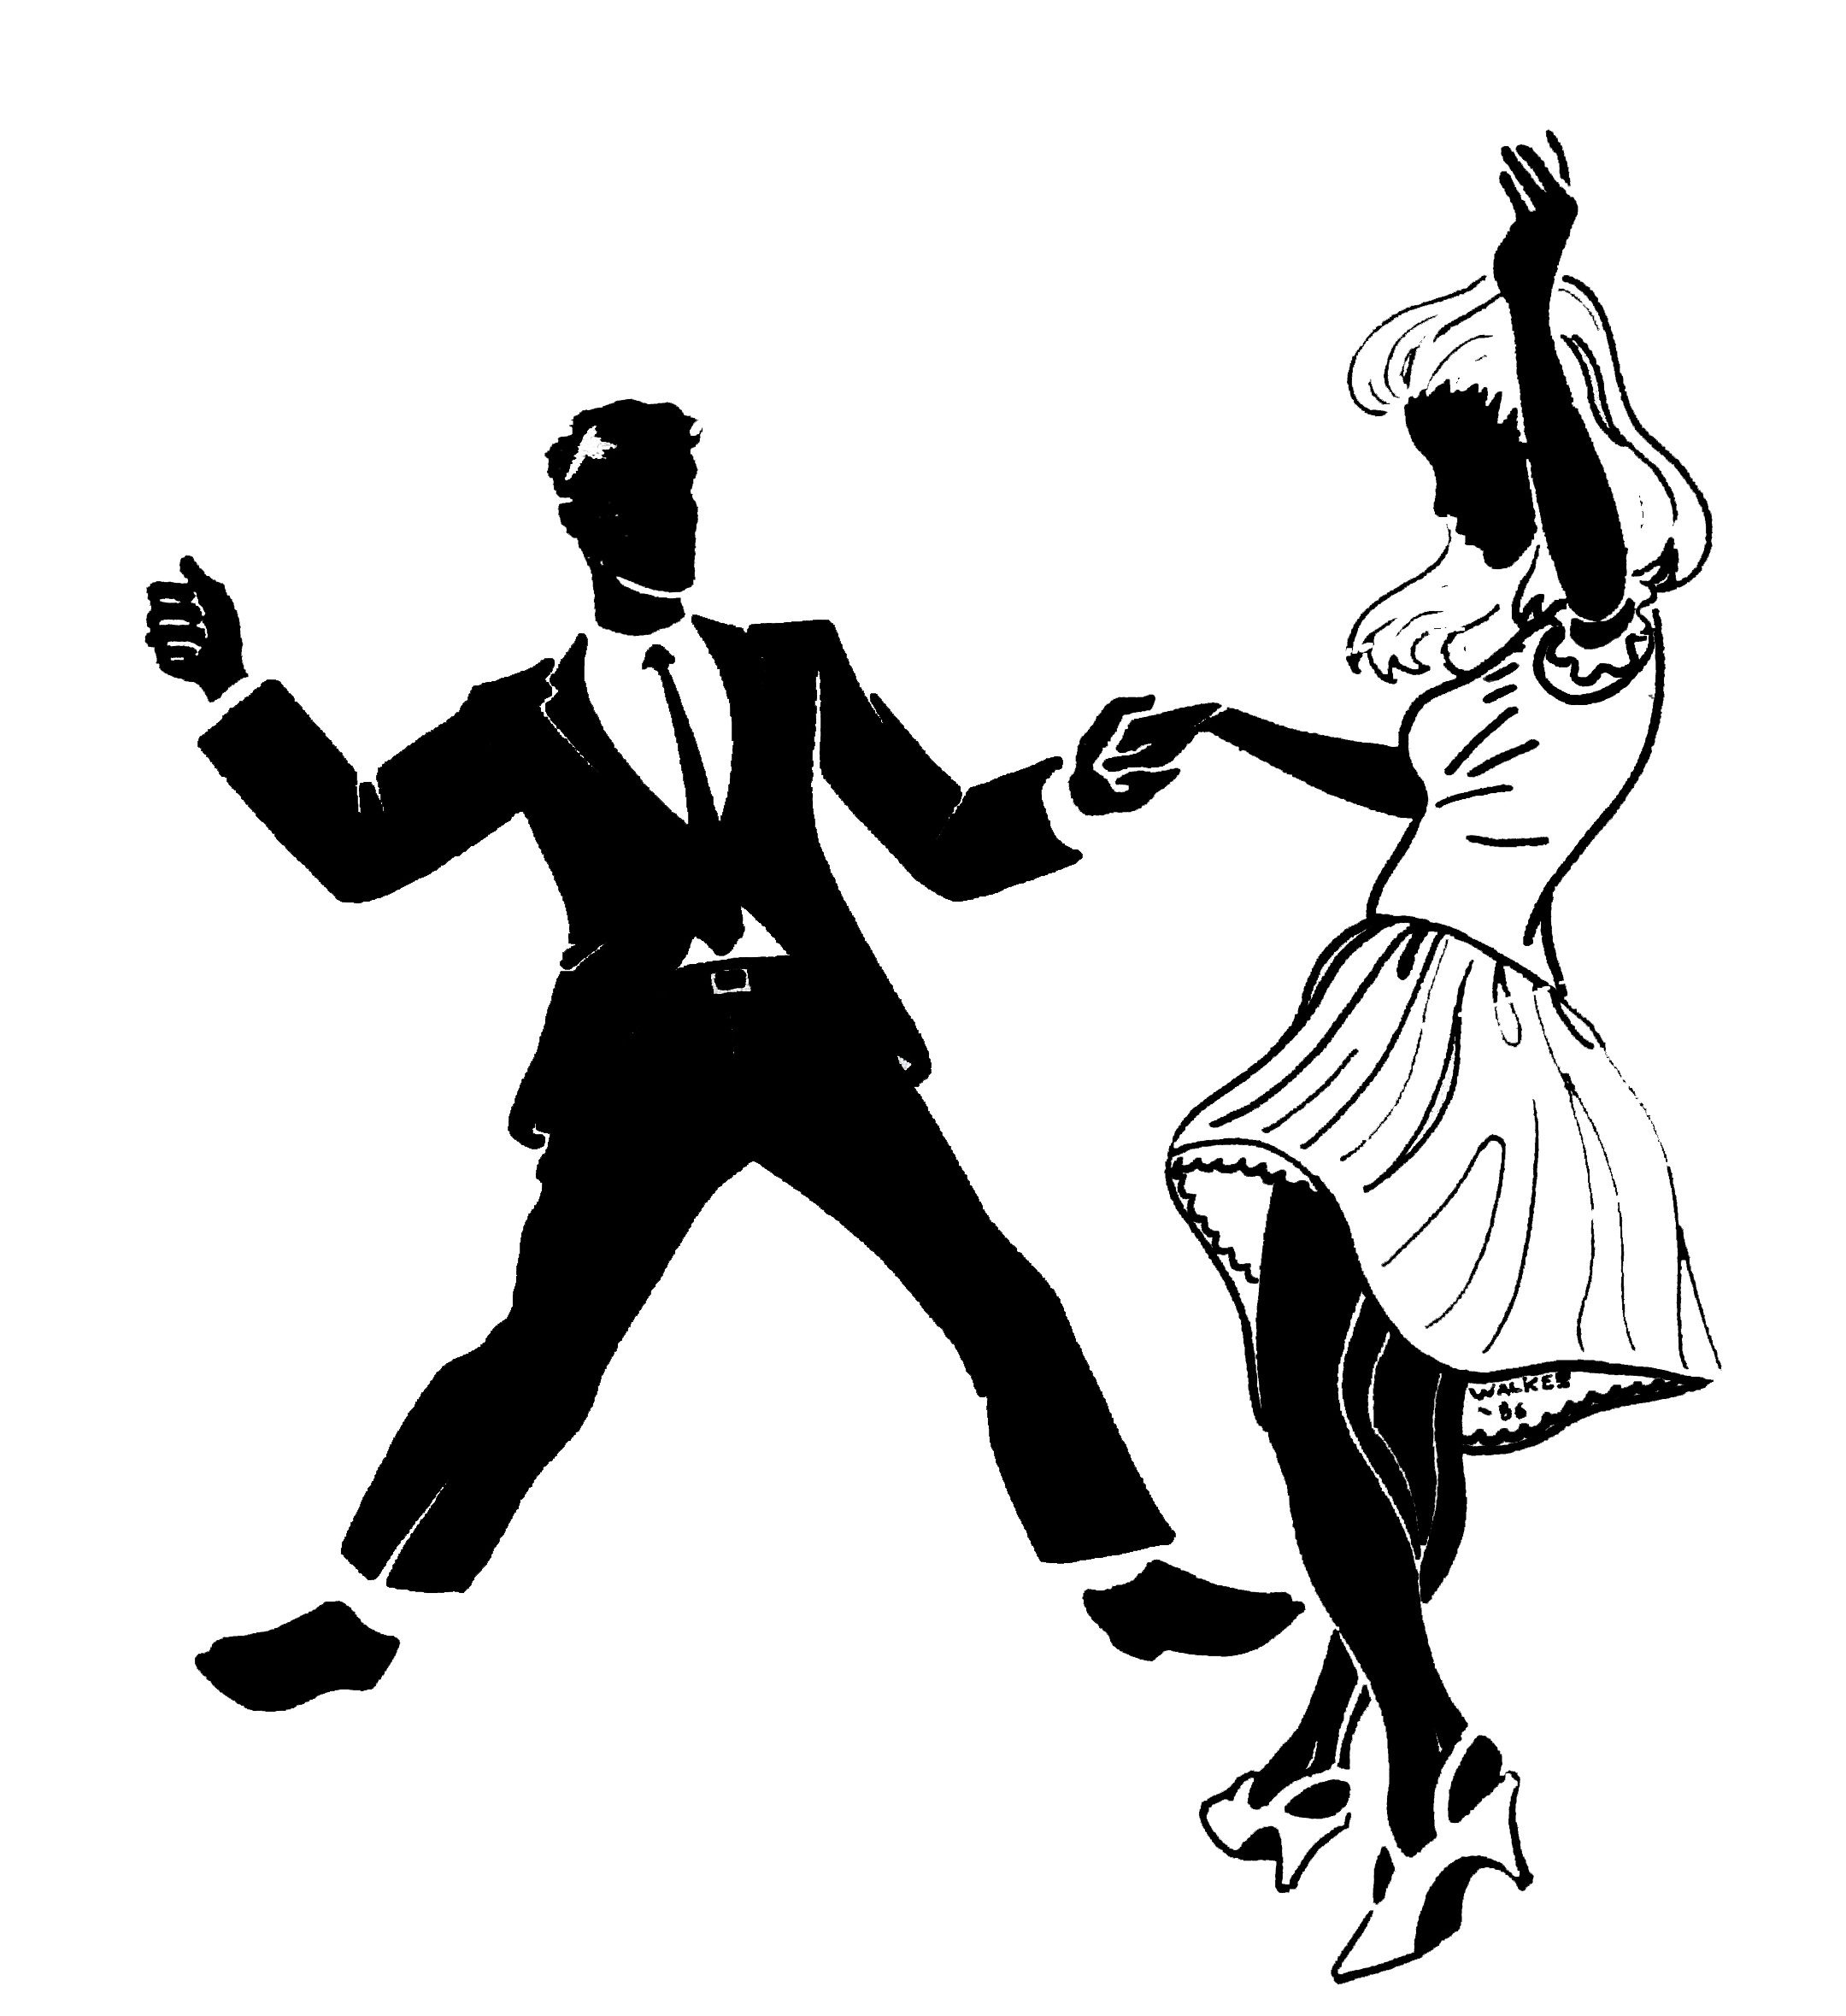 Rock and Roll Dance: Mouse Drawing, Modern Art, Swing Dance, Jazz Music, The 1920s–1940s, Lindy Hop. 2160x2360 HD Wallpaper.